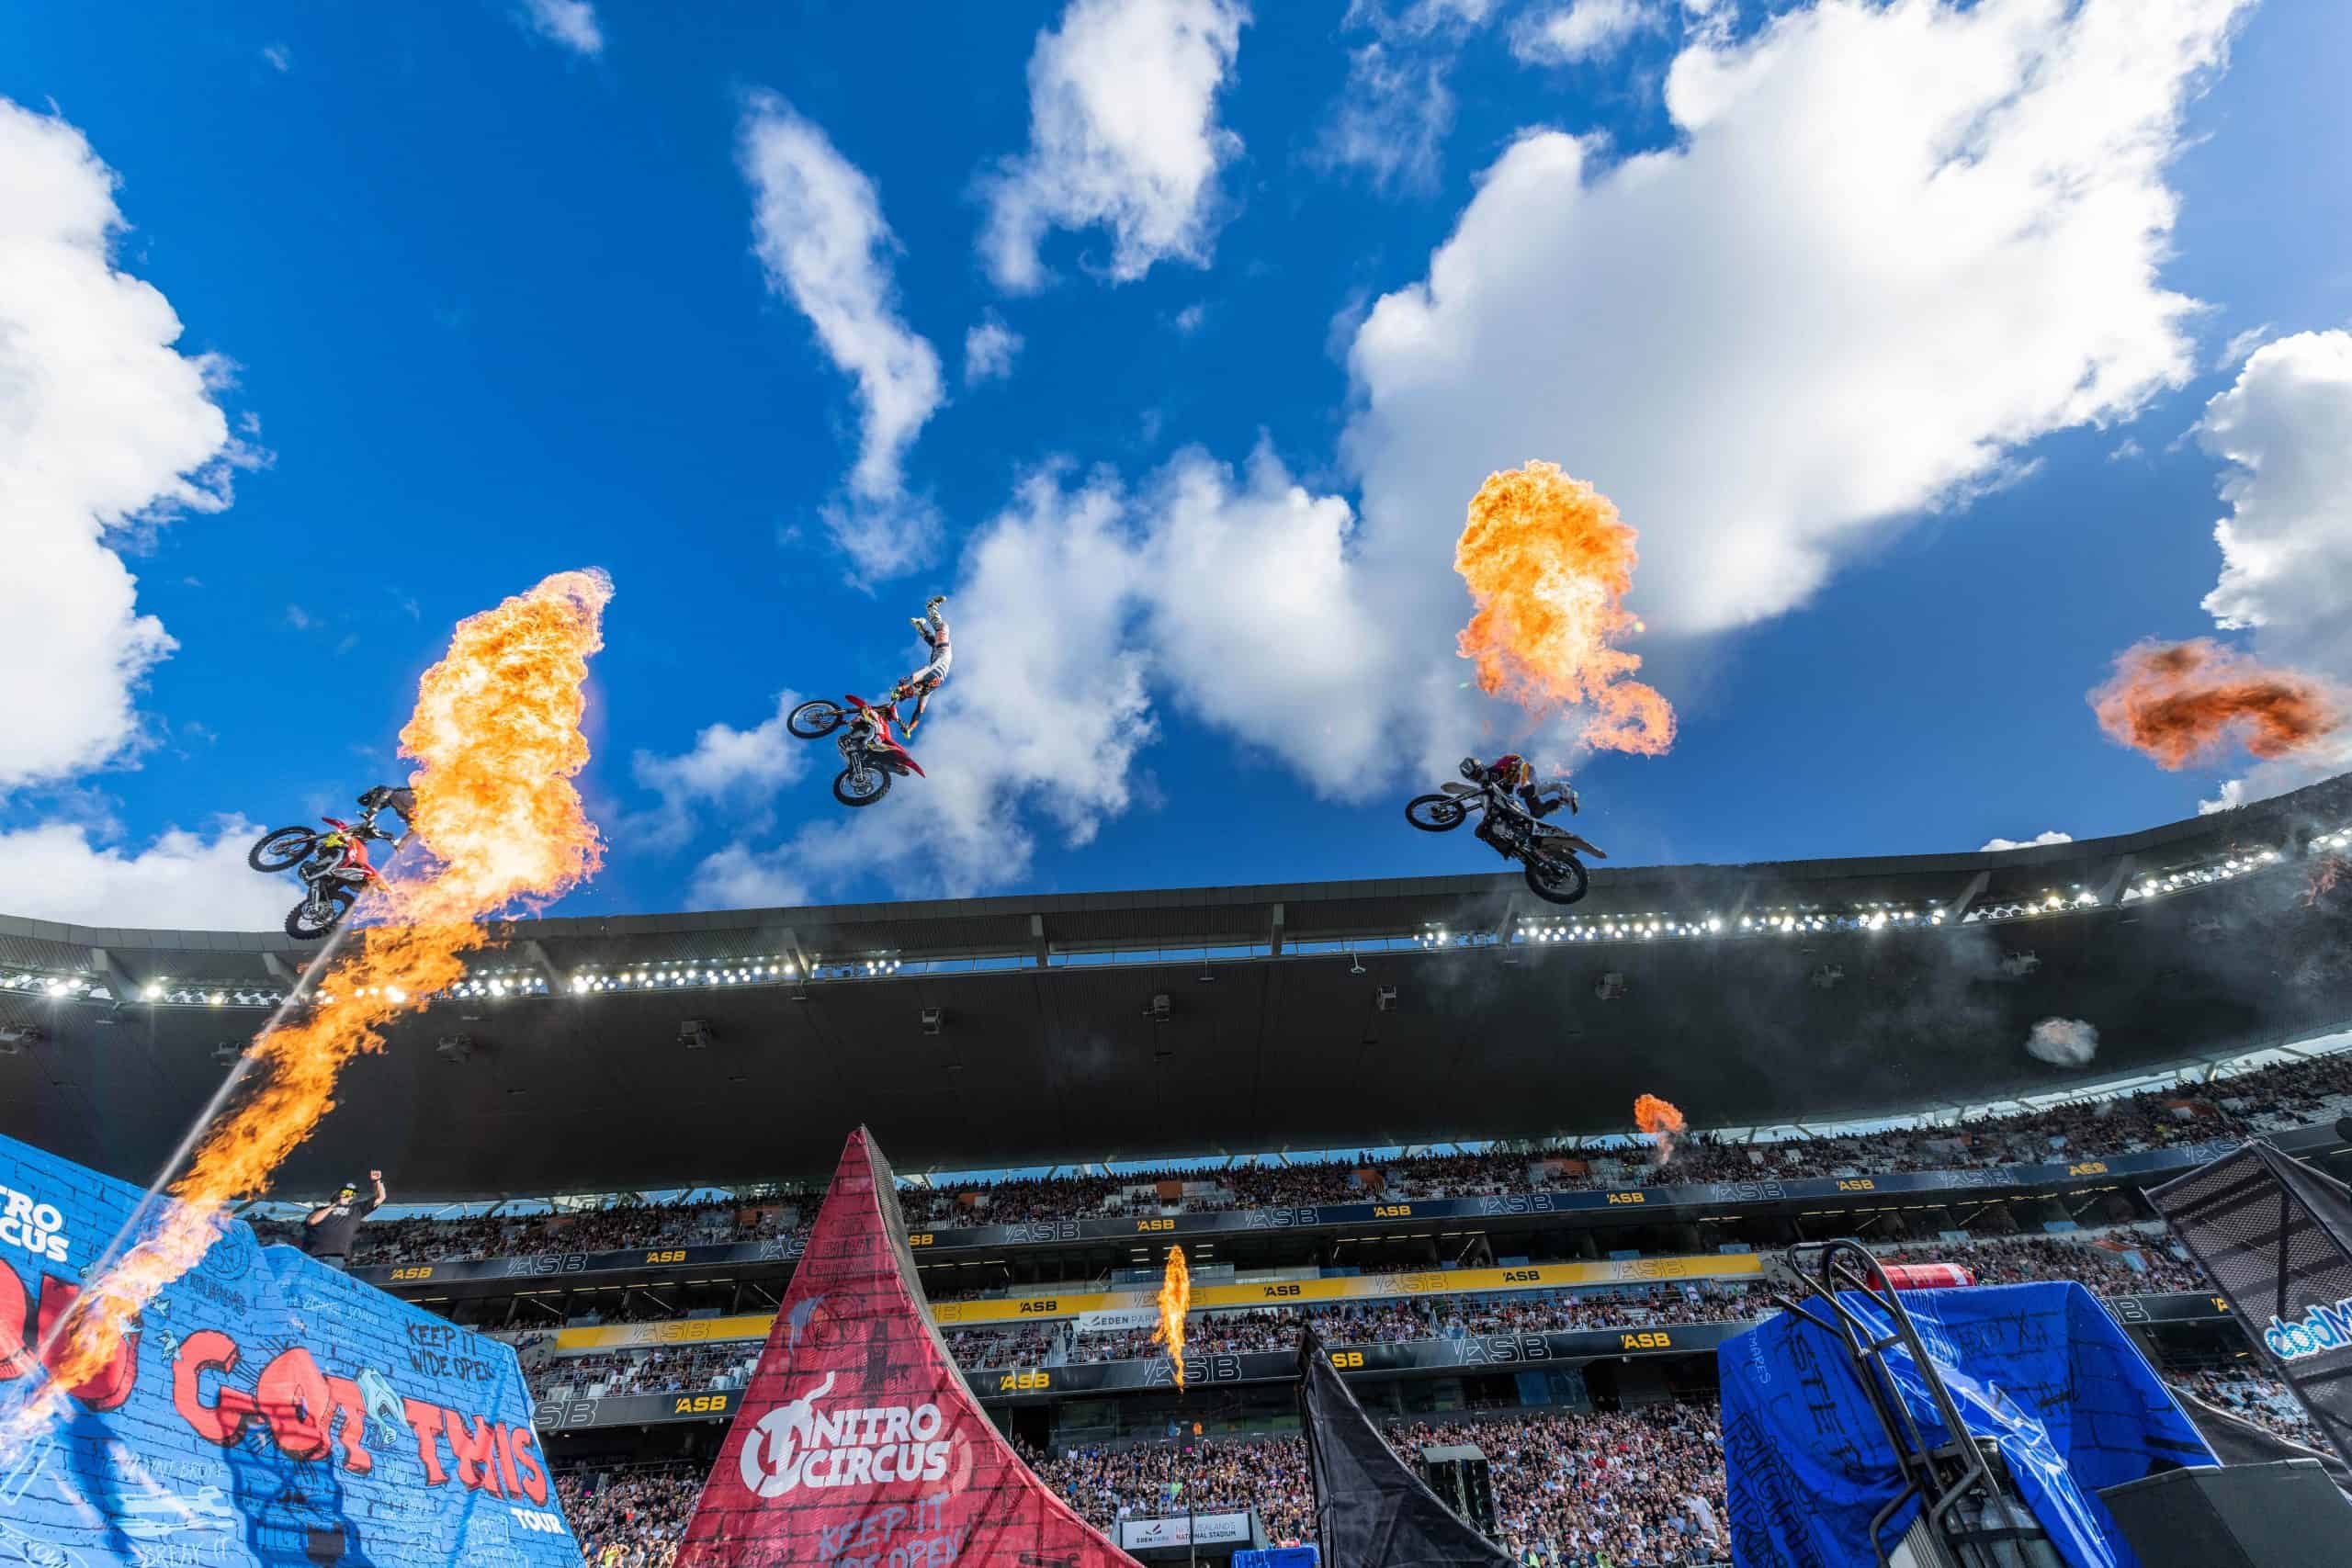 Nitro Circus Best of Scooter 